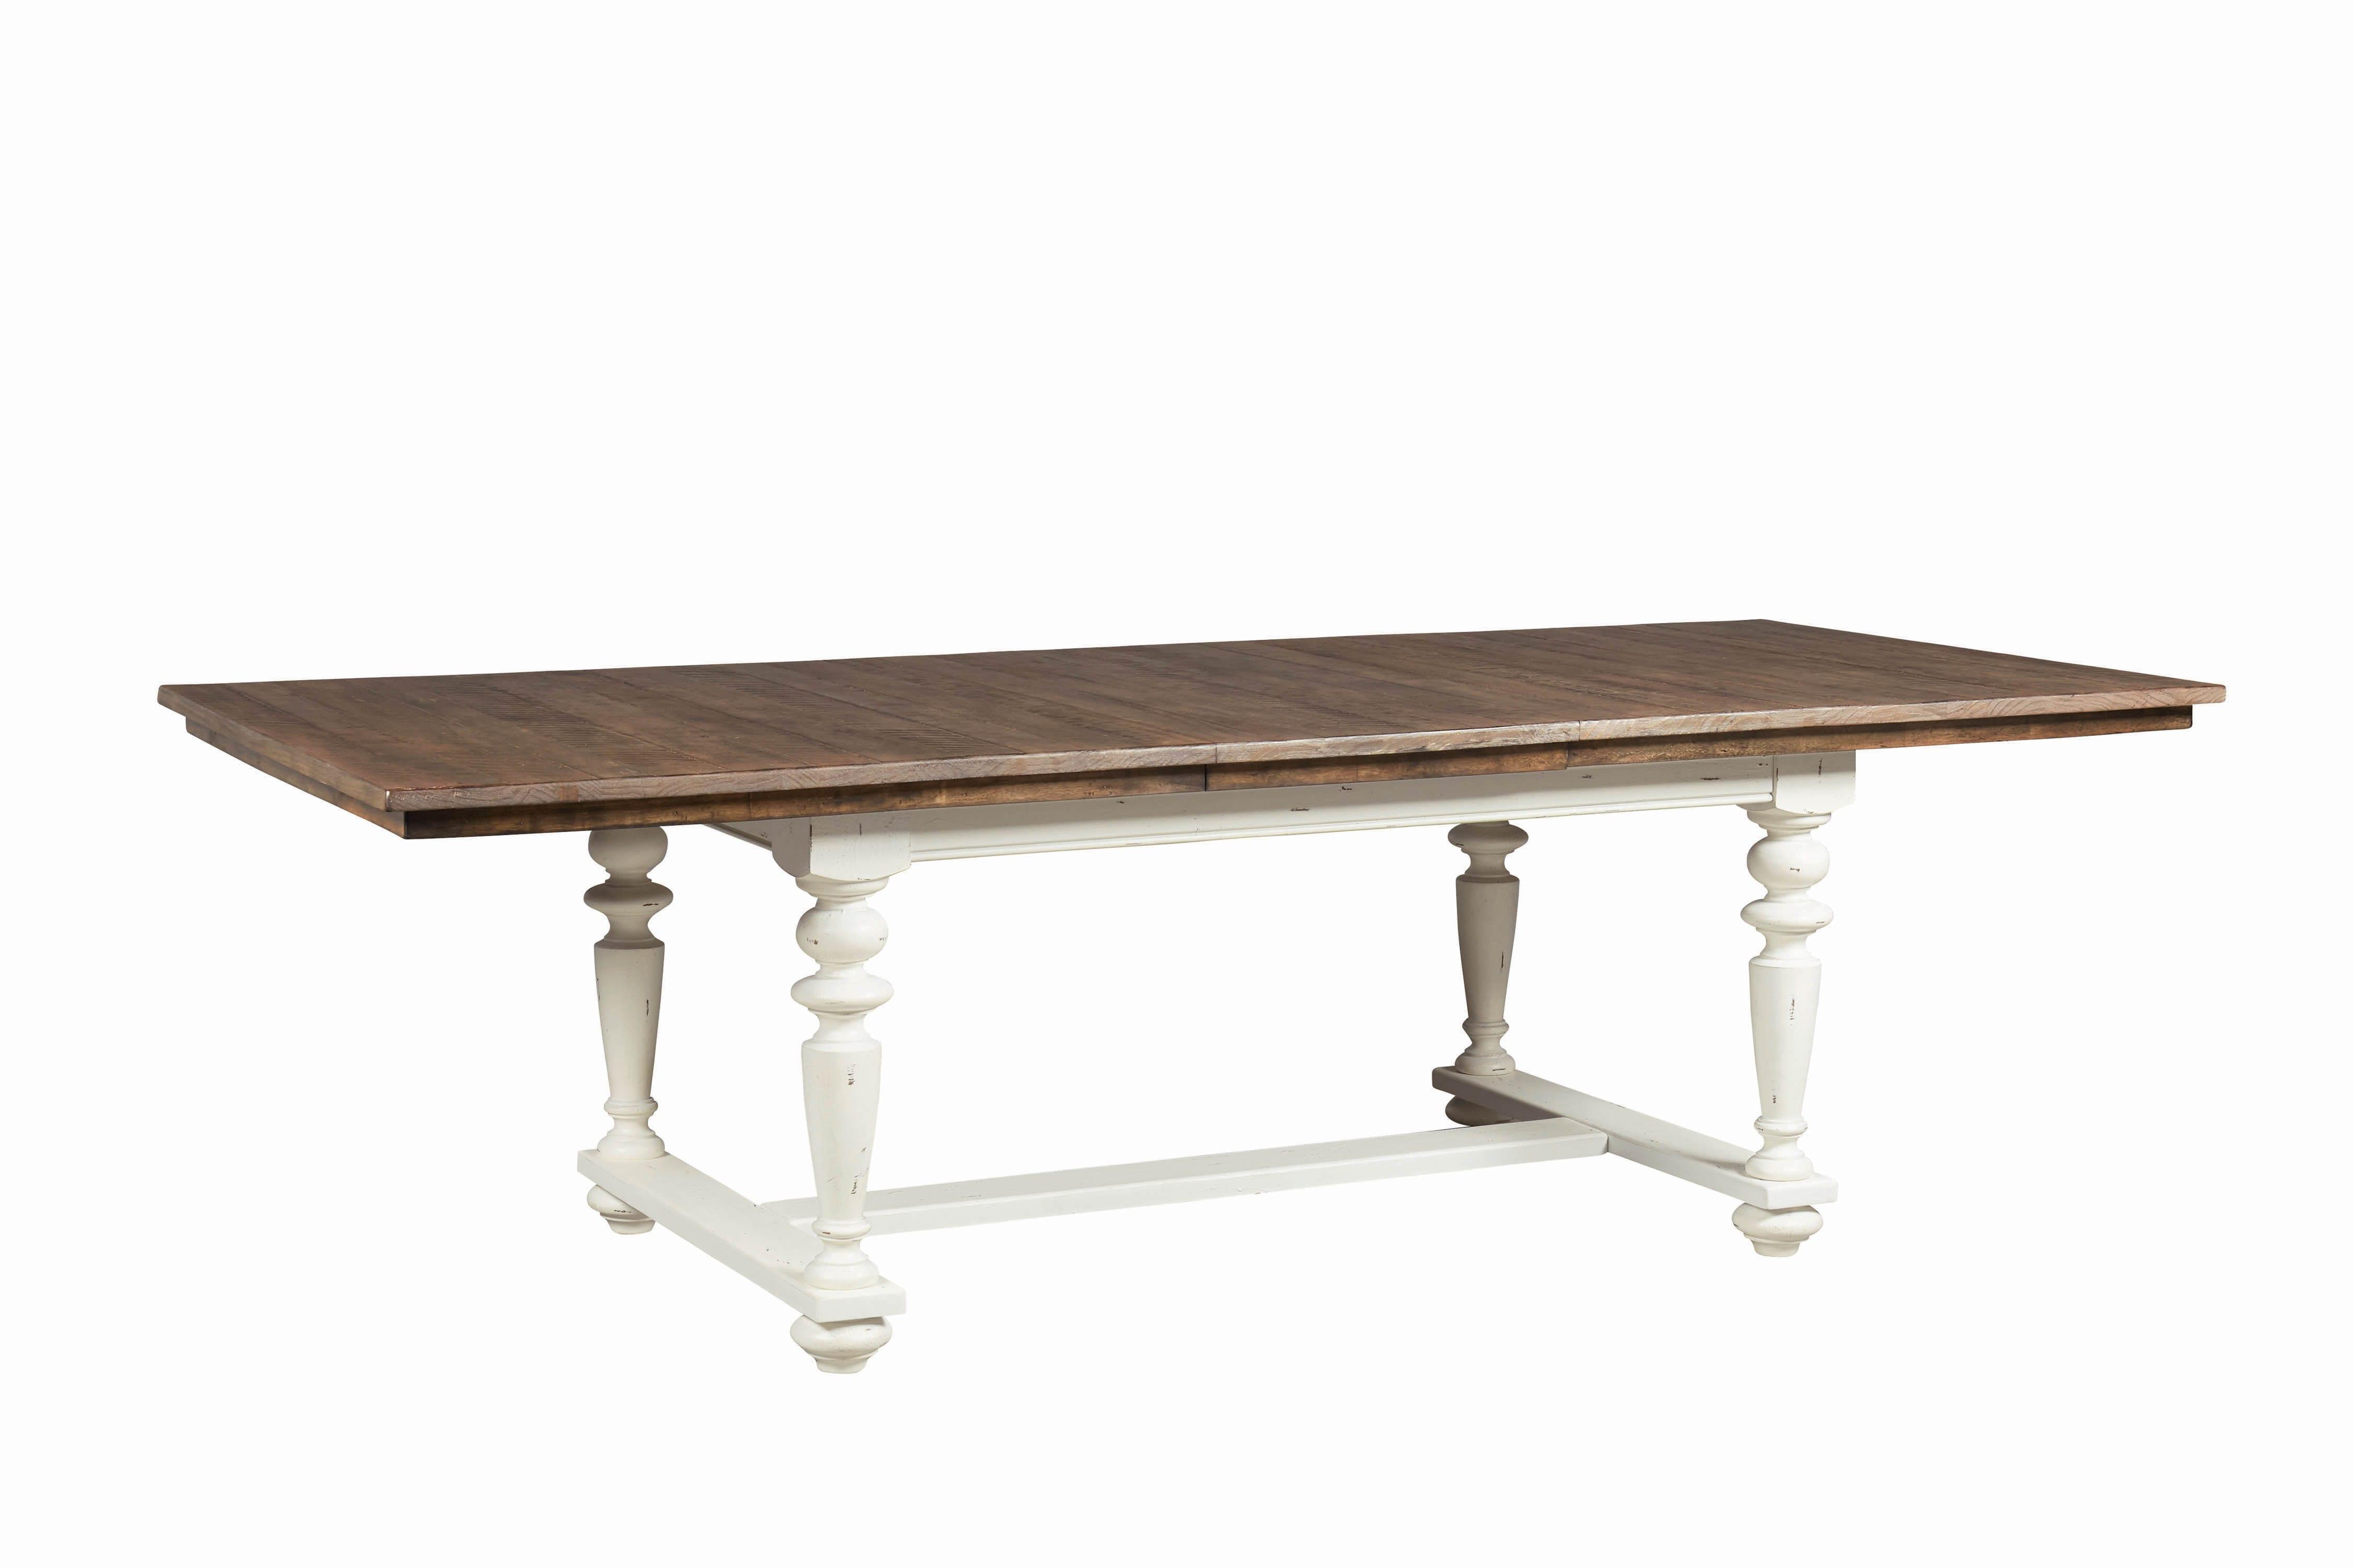 Modern Dining Table Simpson 105181 in Beige, White 